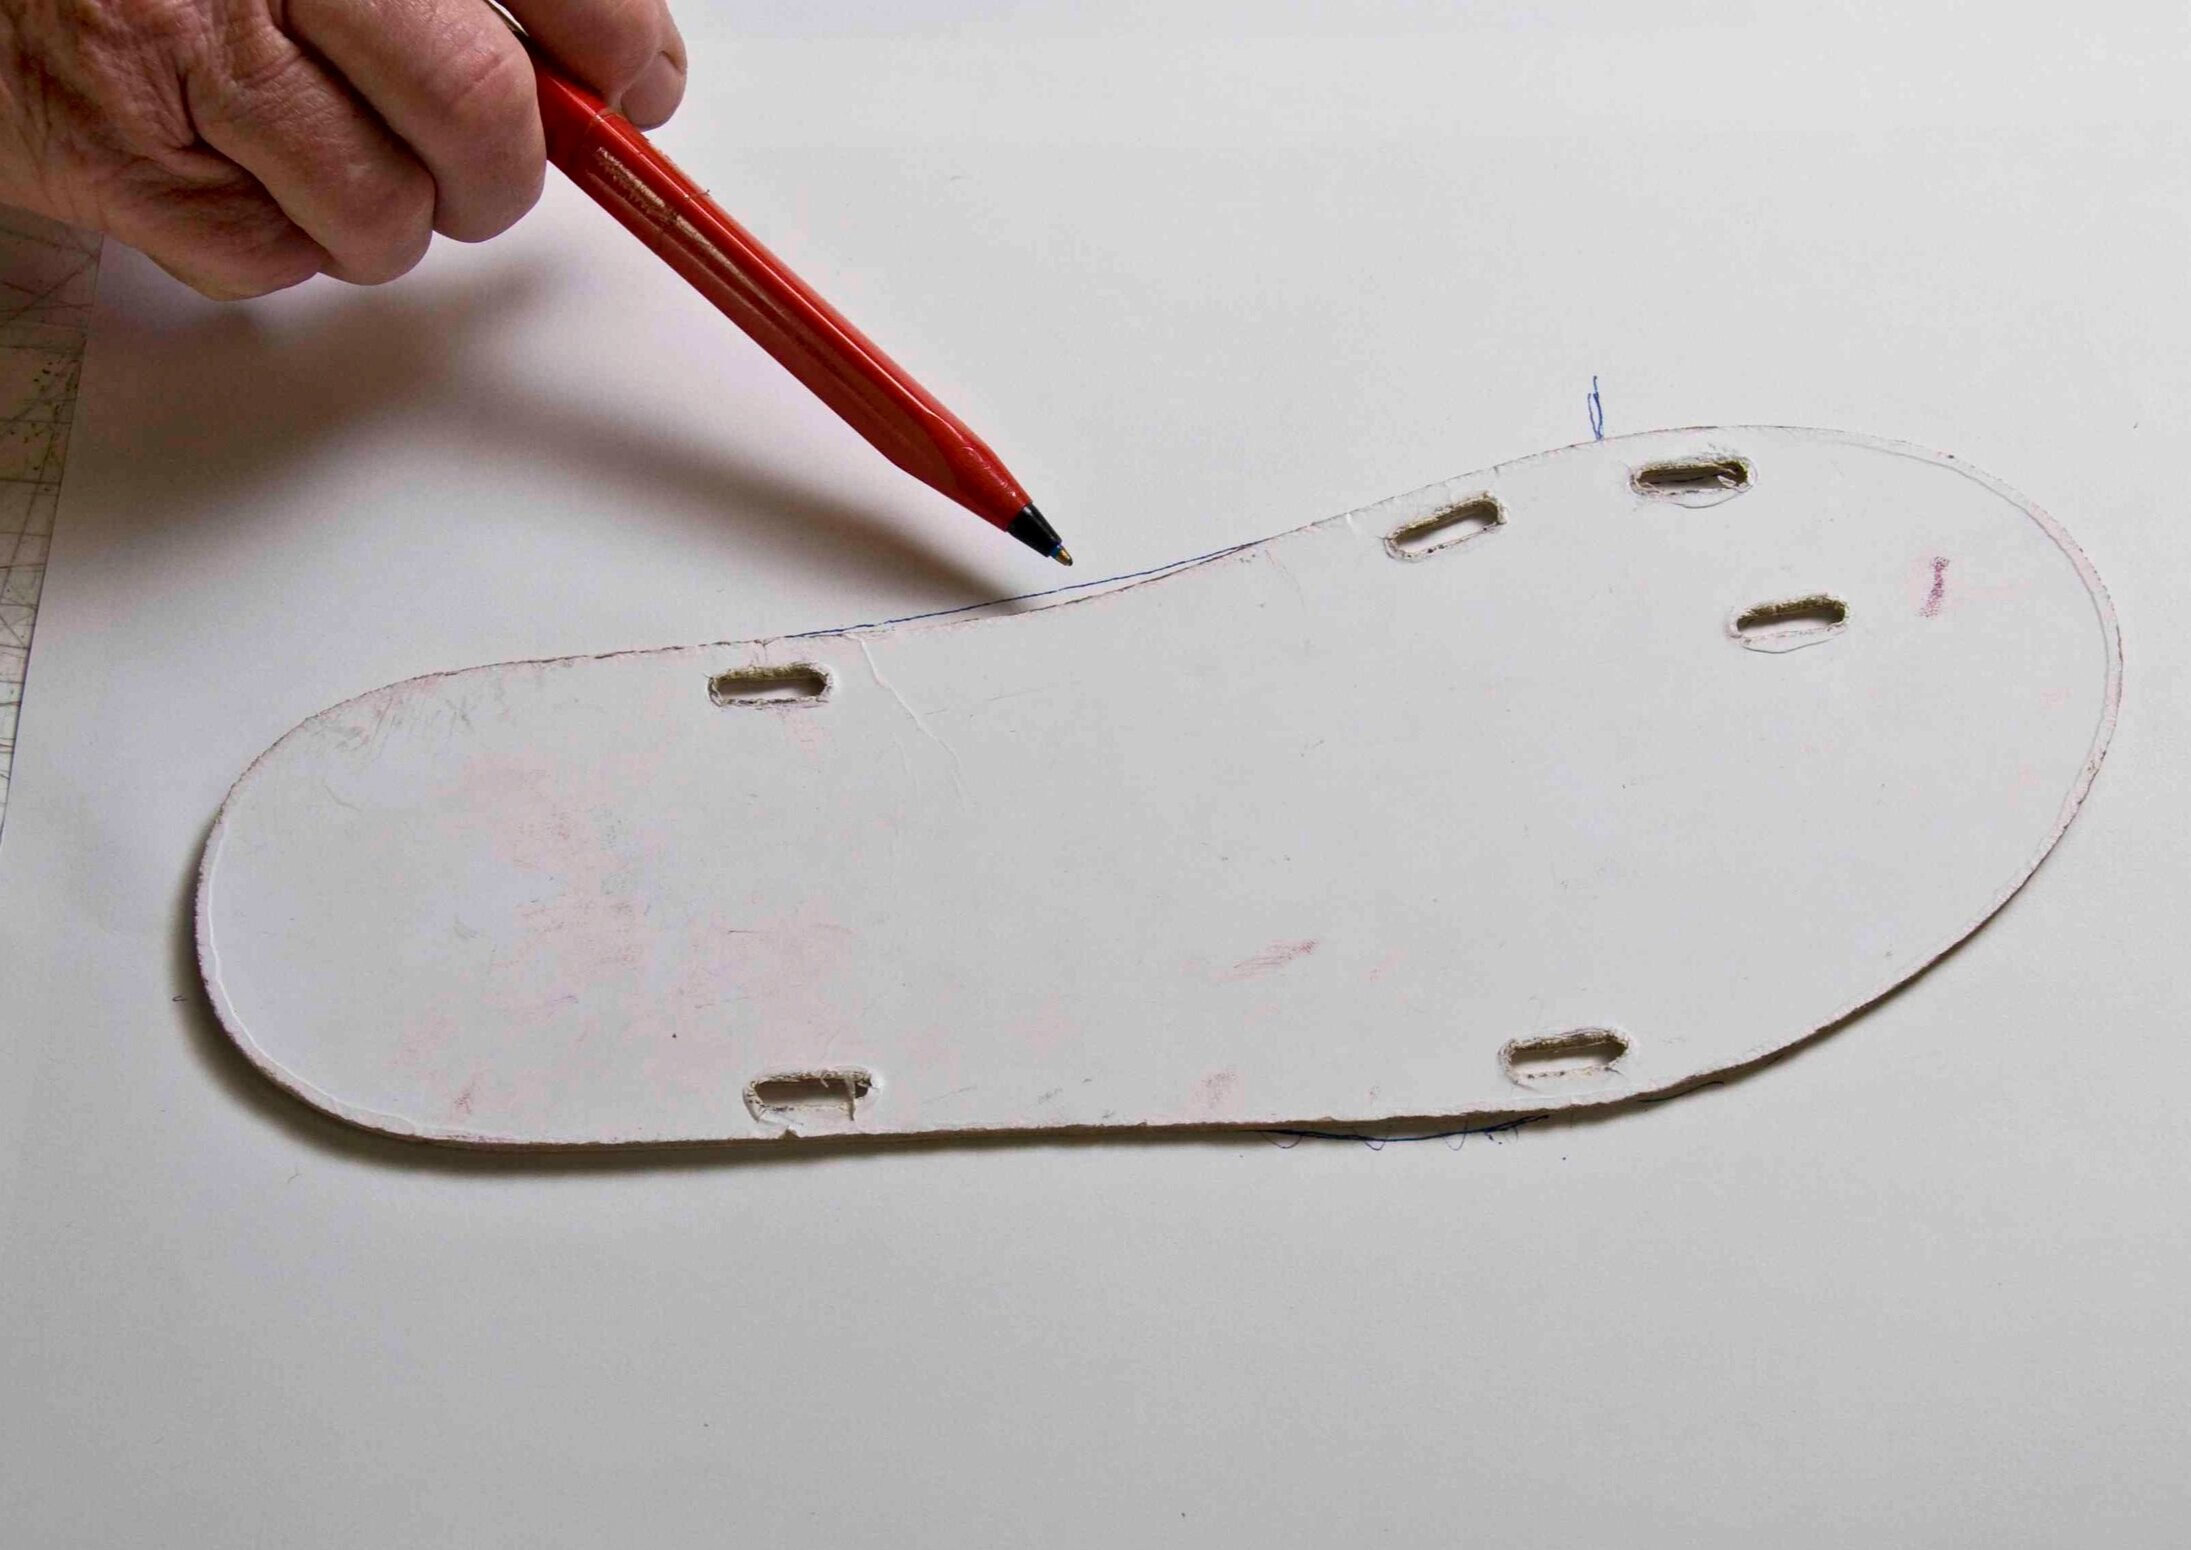 Refining the shape of the sole. You could make a cardboard template either freehand or by tracing an existing sole.